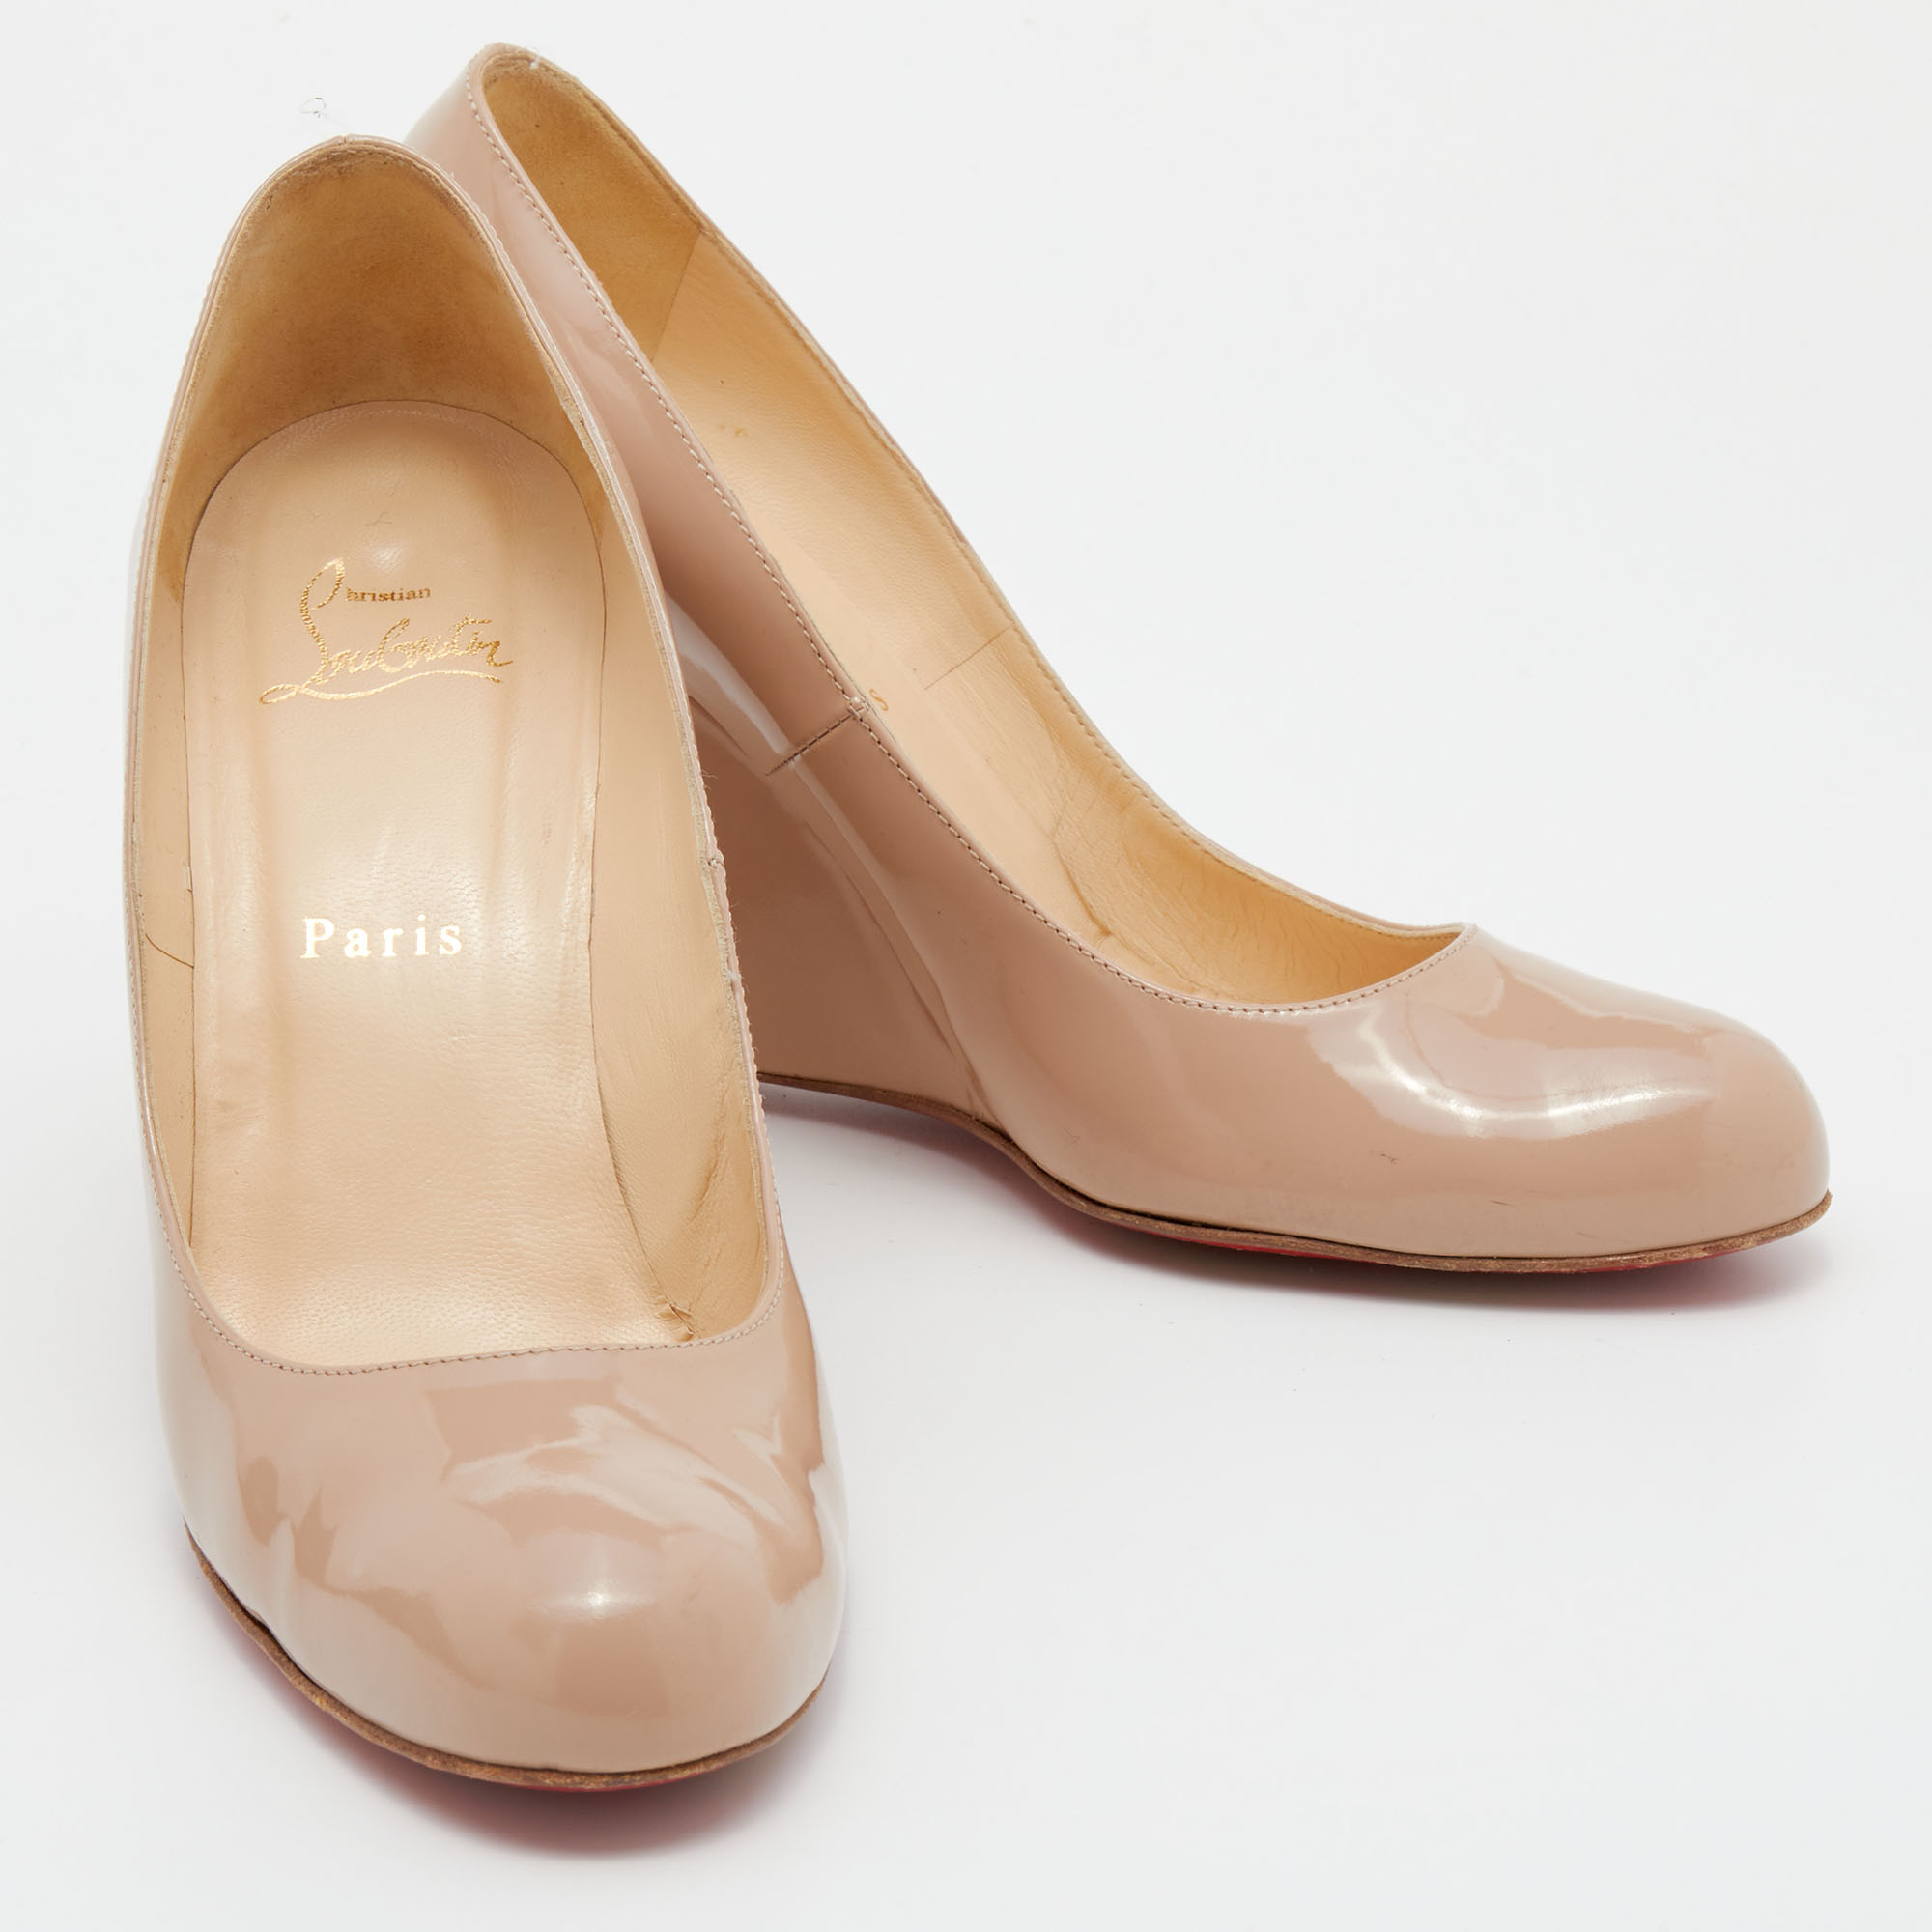 Christian Louboutin Beige Patent Leather RonRon Zeppa Wedge Pumps Size 38.5